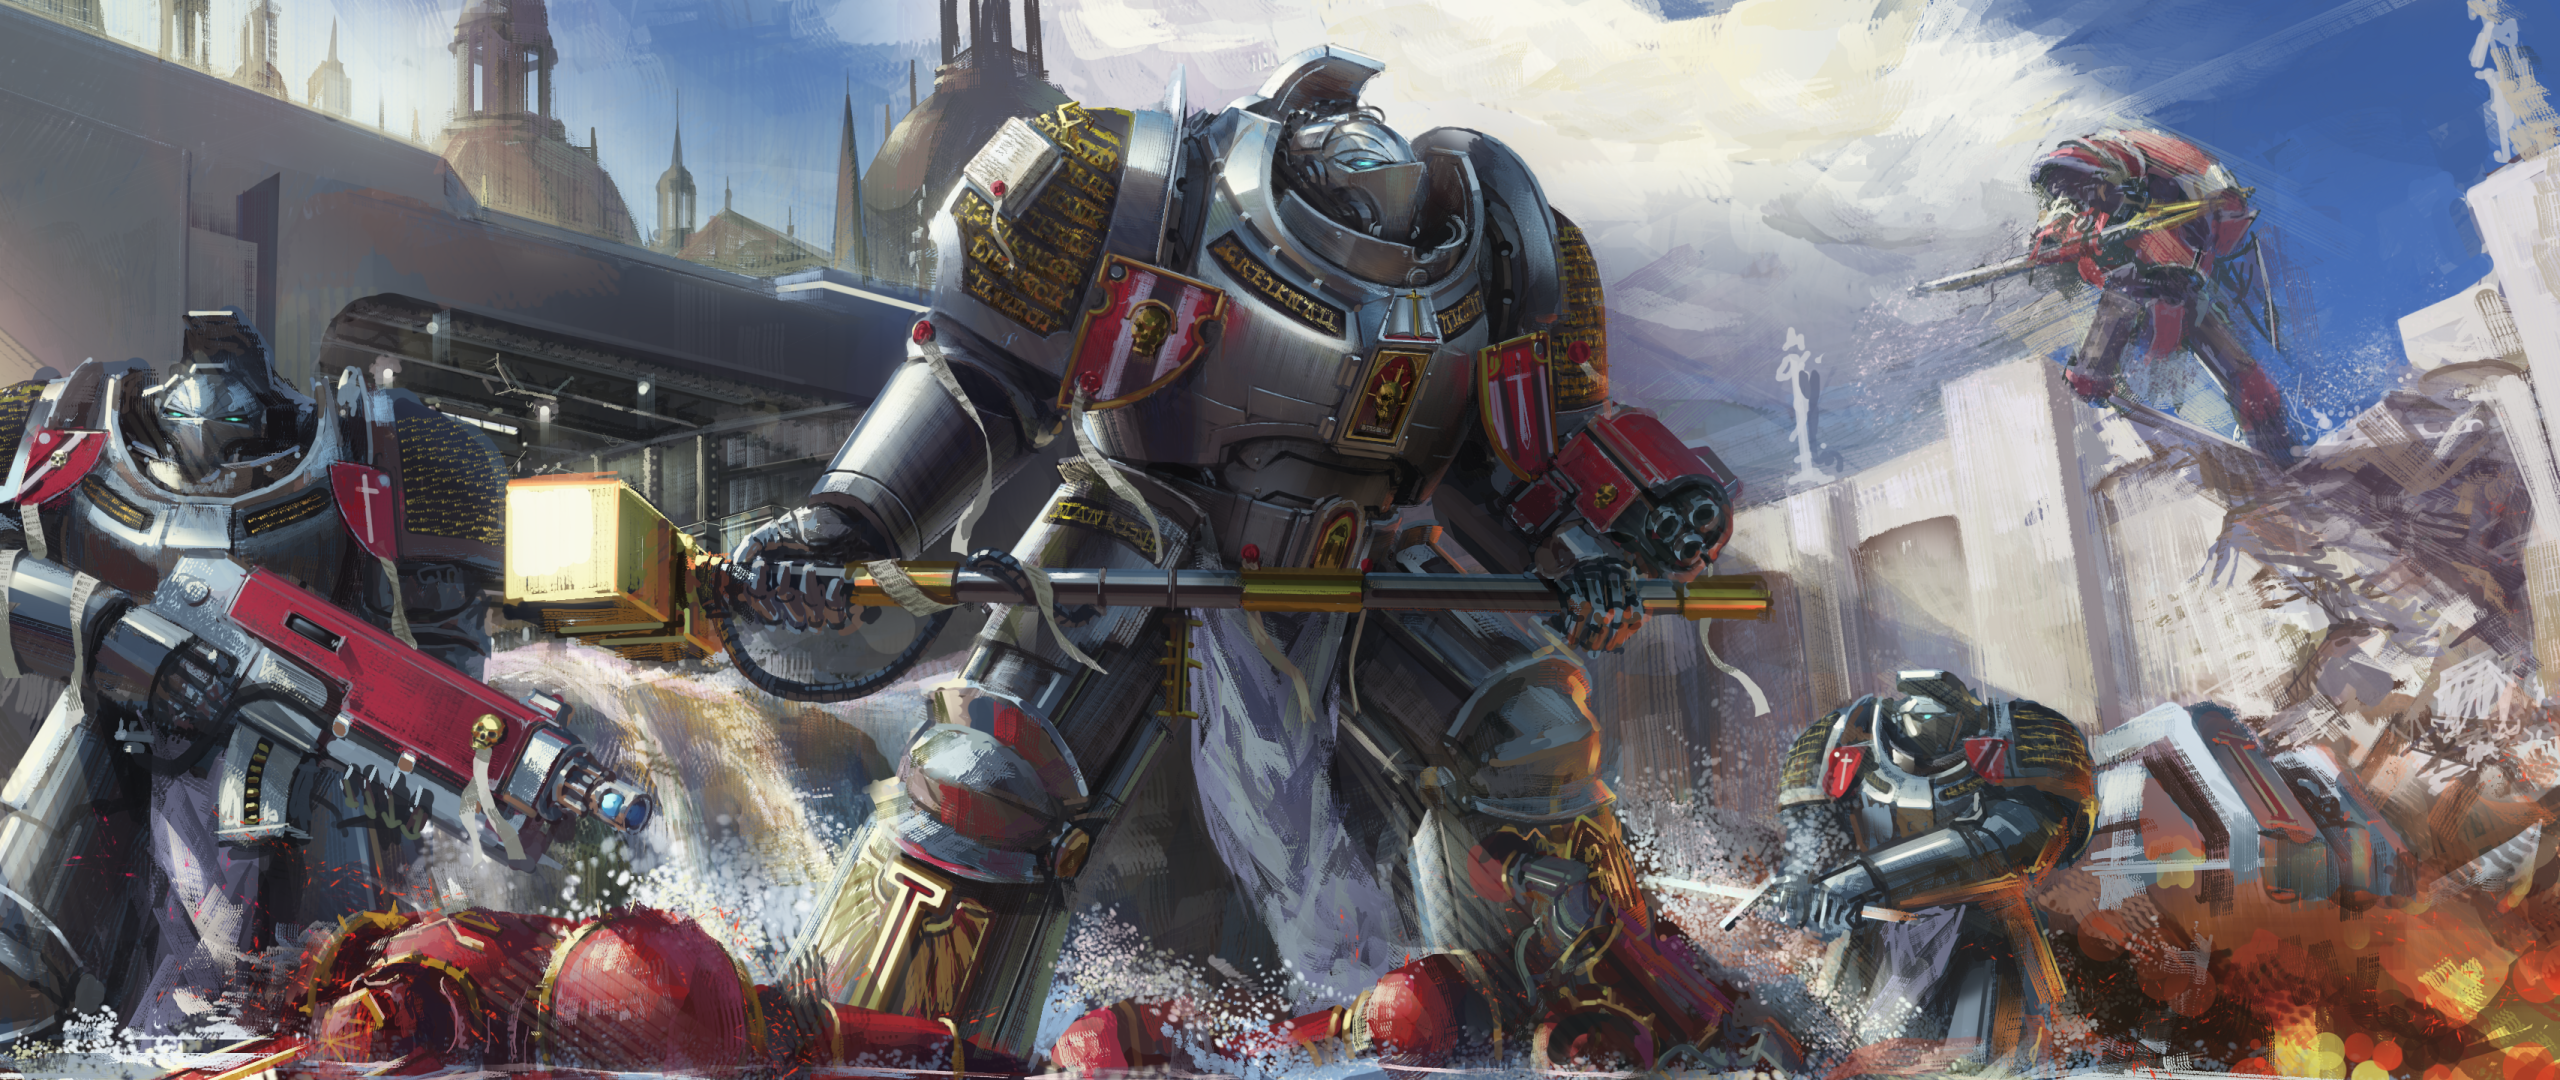 General 2560x1080 Warhammer 30,000 Warhammer 40,000 Warhammer space marines psyker magic science fiction technology sword blades gun bolter Inquisition power armor hammer silver gold shield city Adeptus Astartes Grey Knight space clouds sky armor video game characters blue golden hammer video games